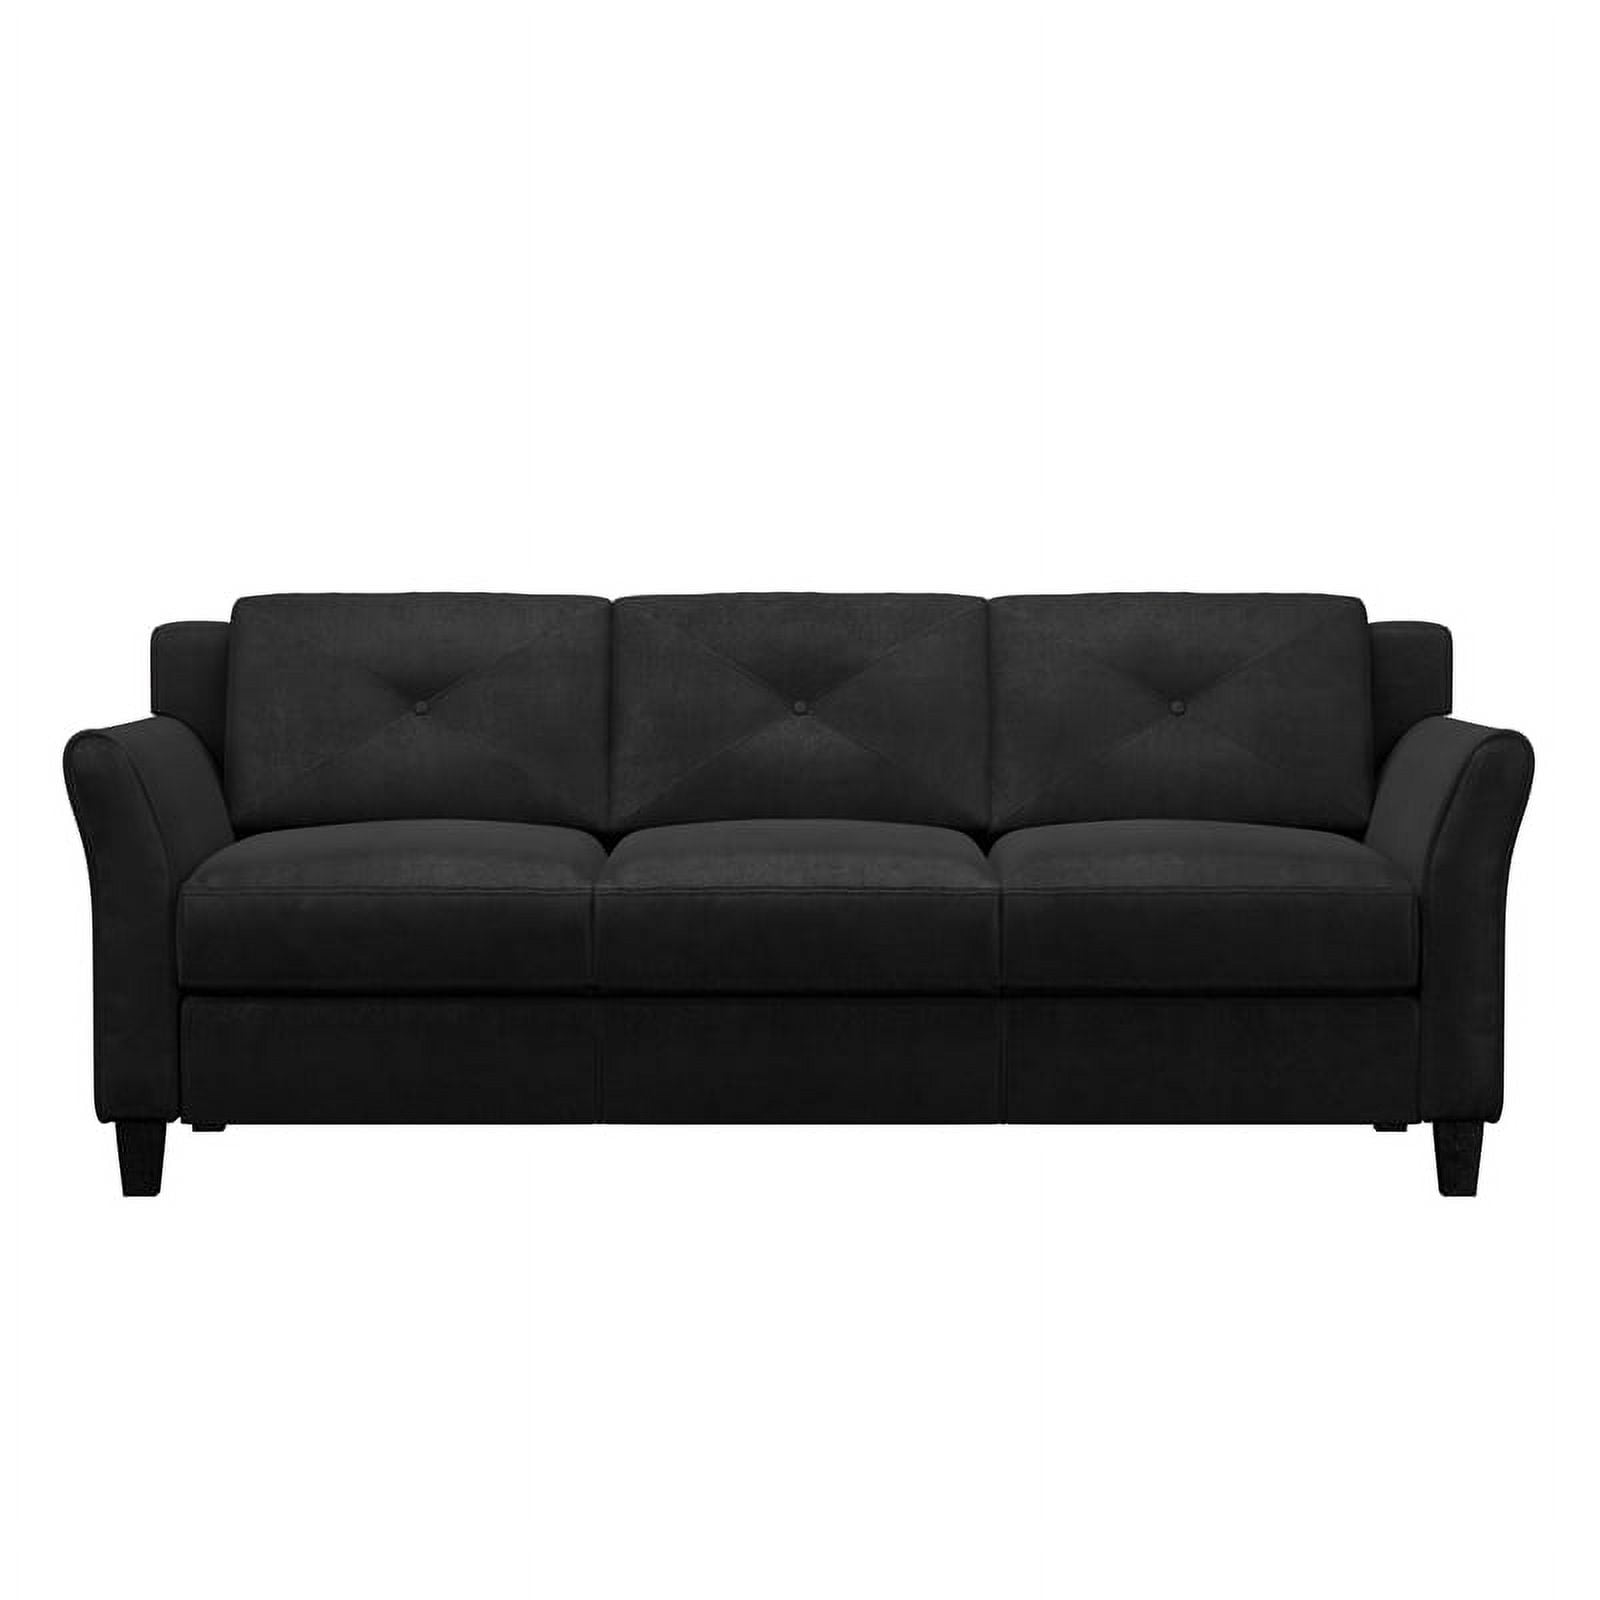 Lifestyle Solutions Hartford Sofa Upholstered Microfiber Curved